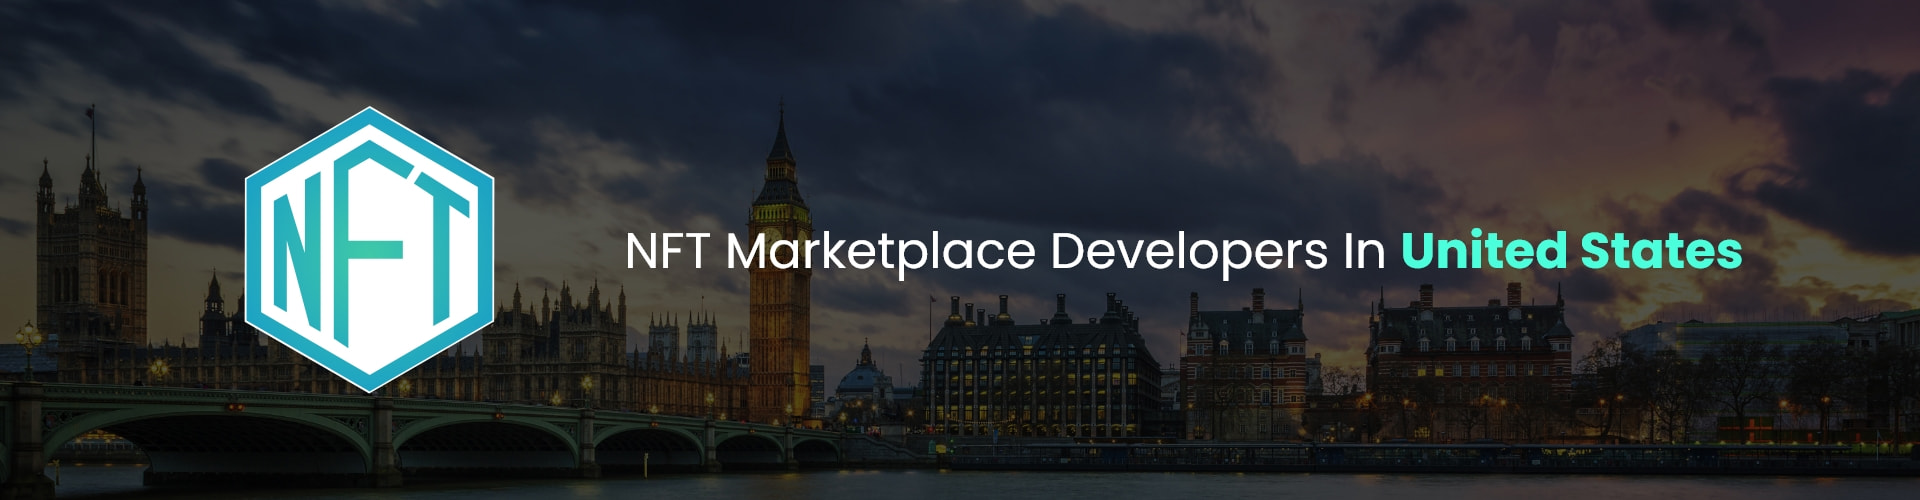 hire nft marketplace developers in united states